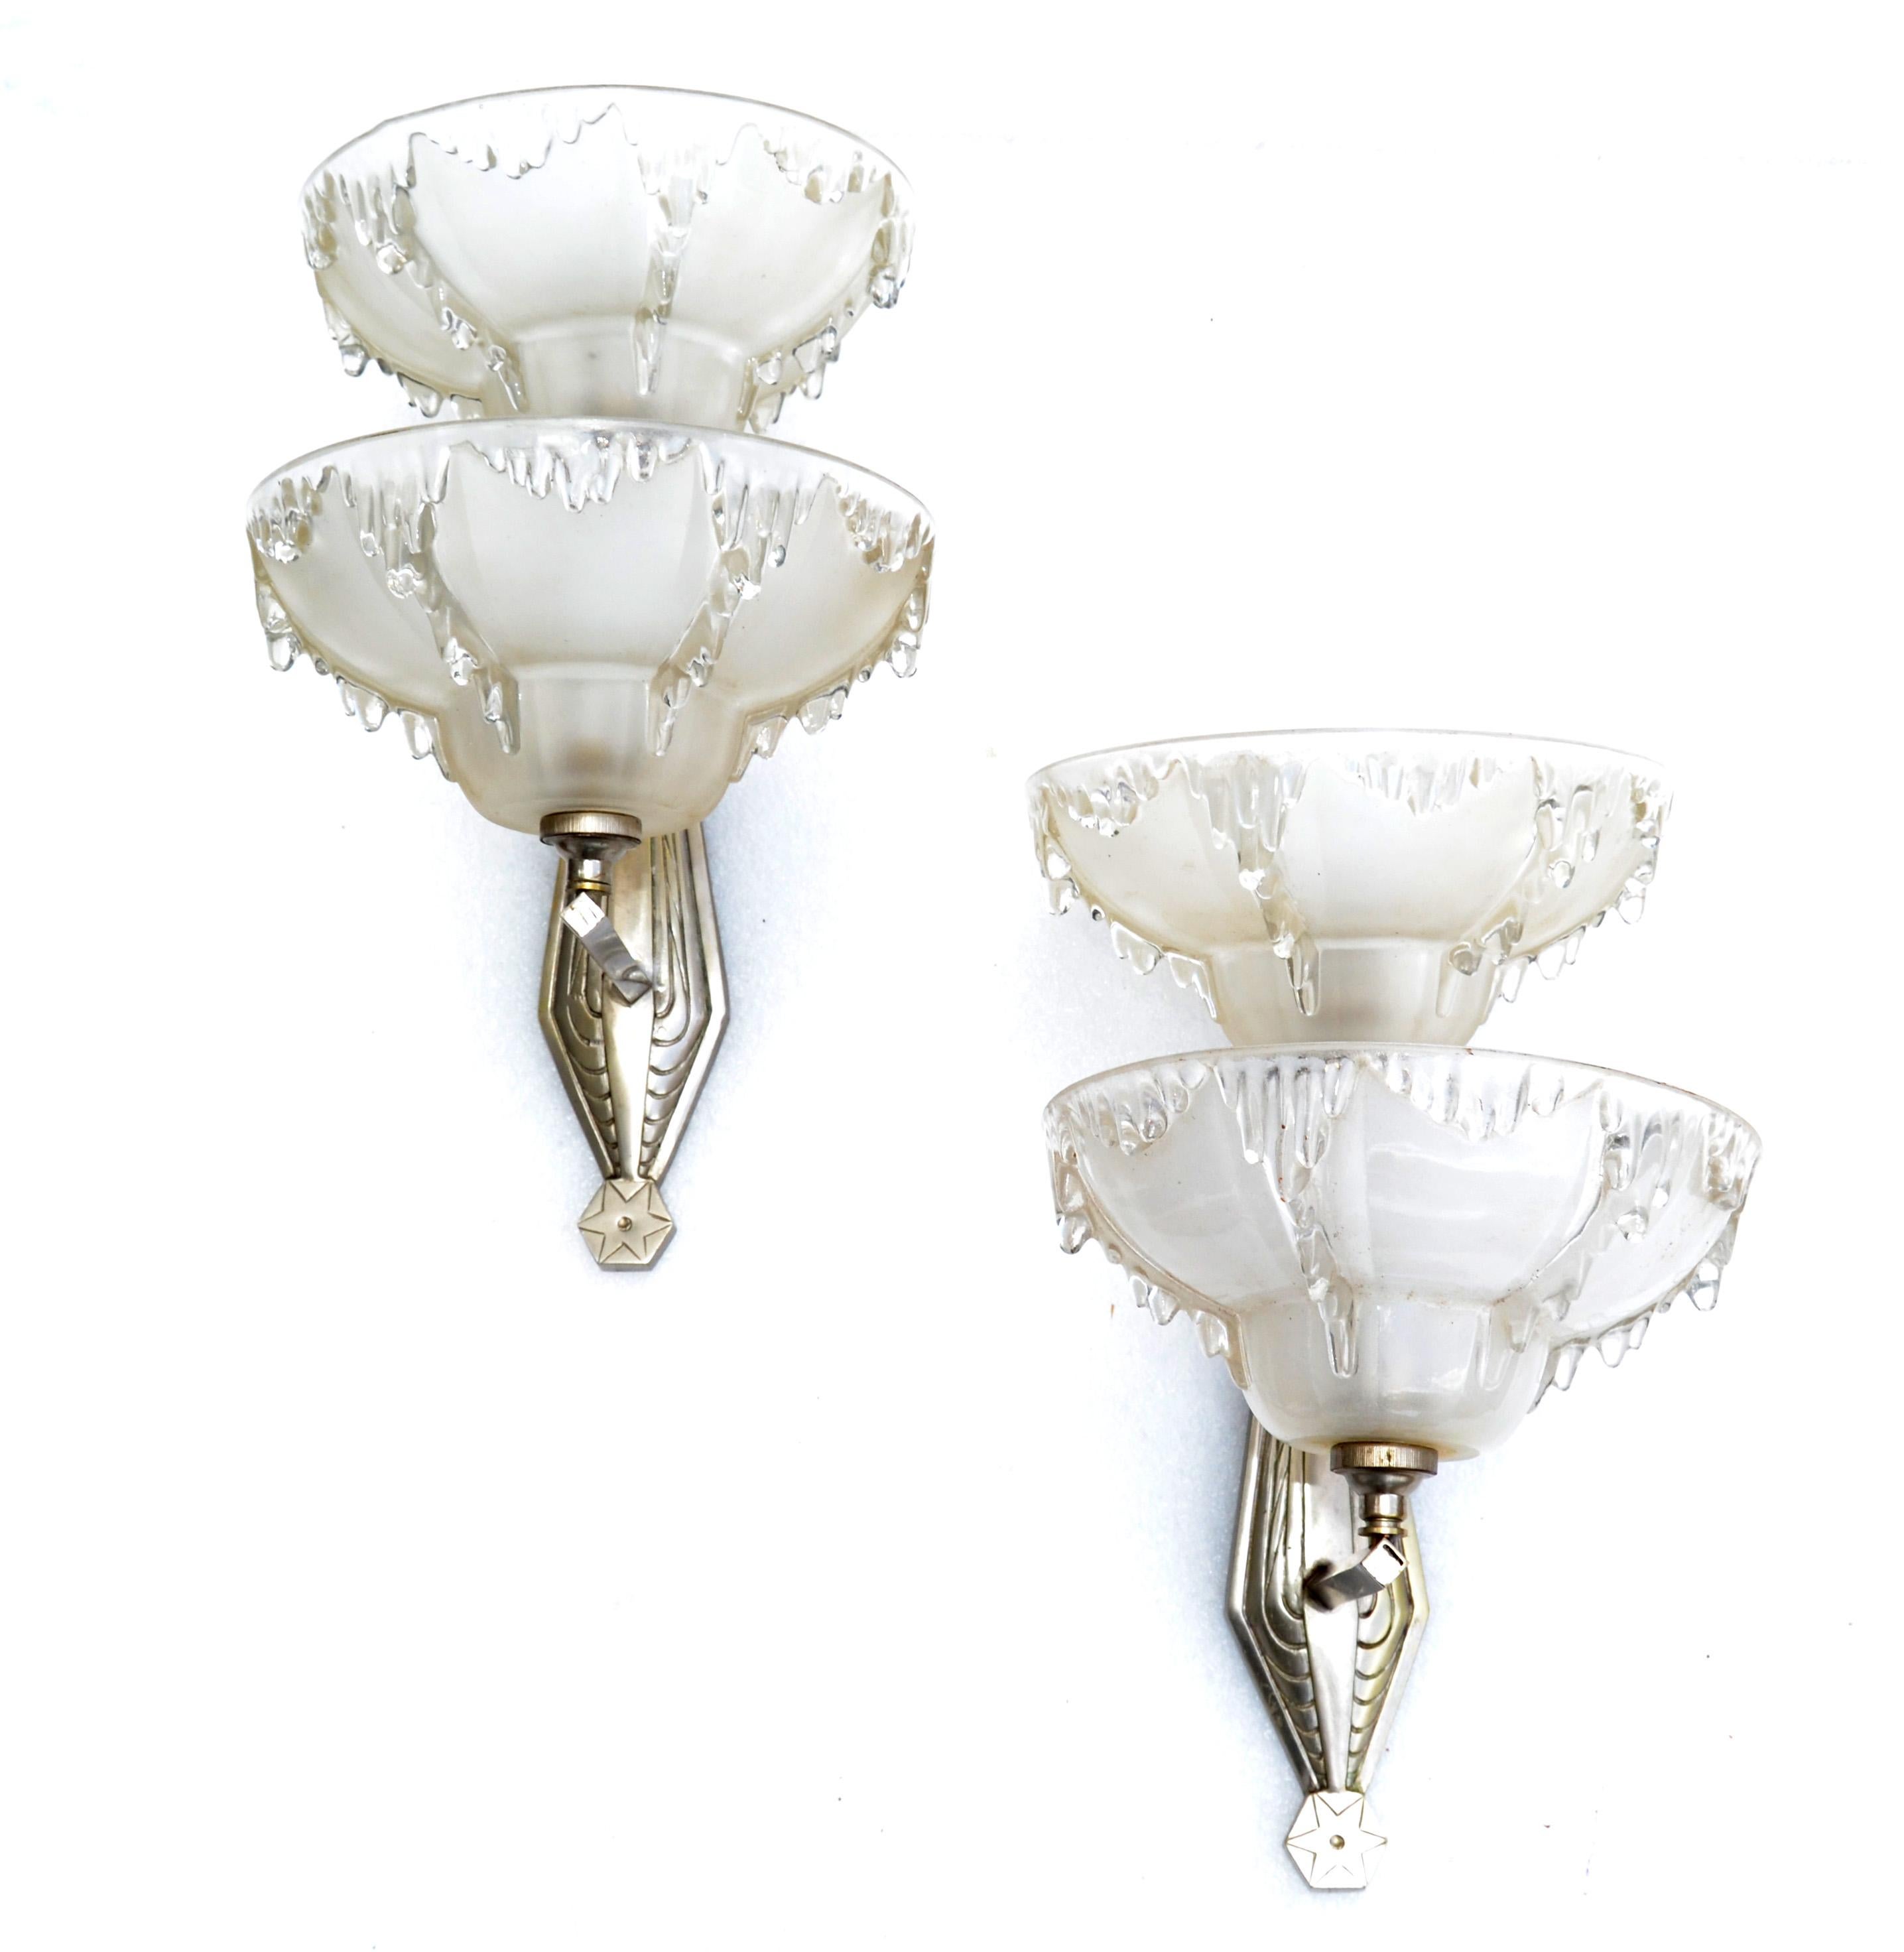 Polished Art Deco Blown Murano Glass & Steel Wall Sconces France Mid-Century Modern, Pair For Sale